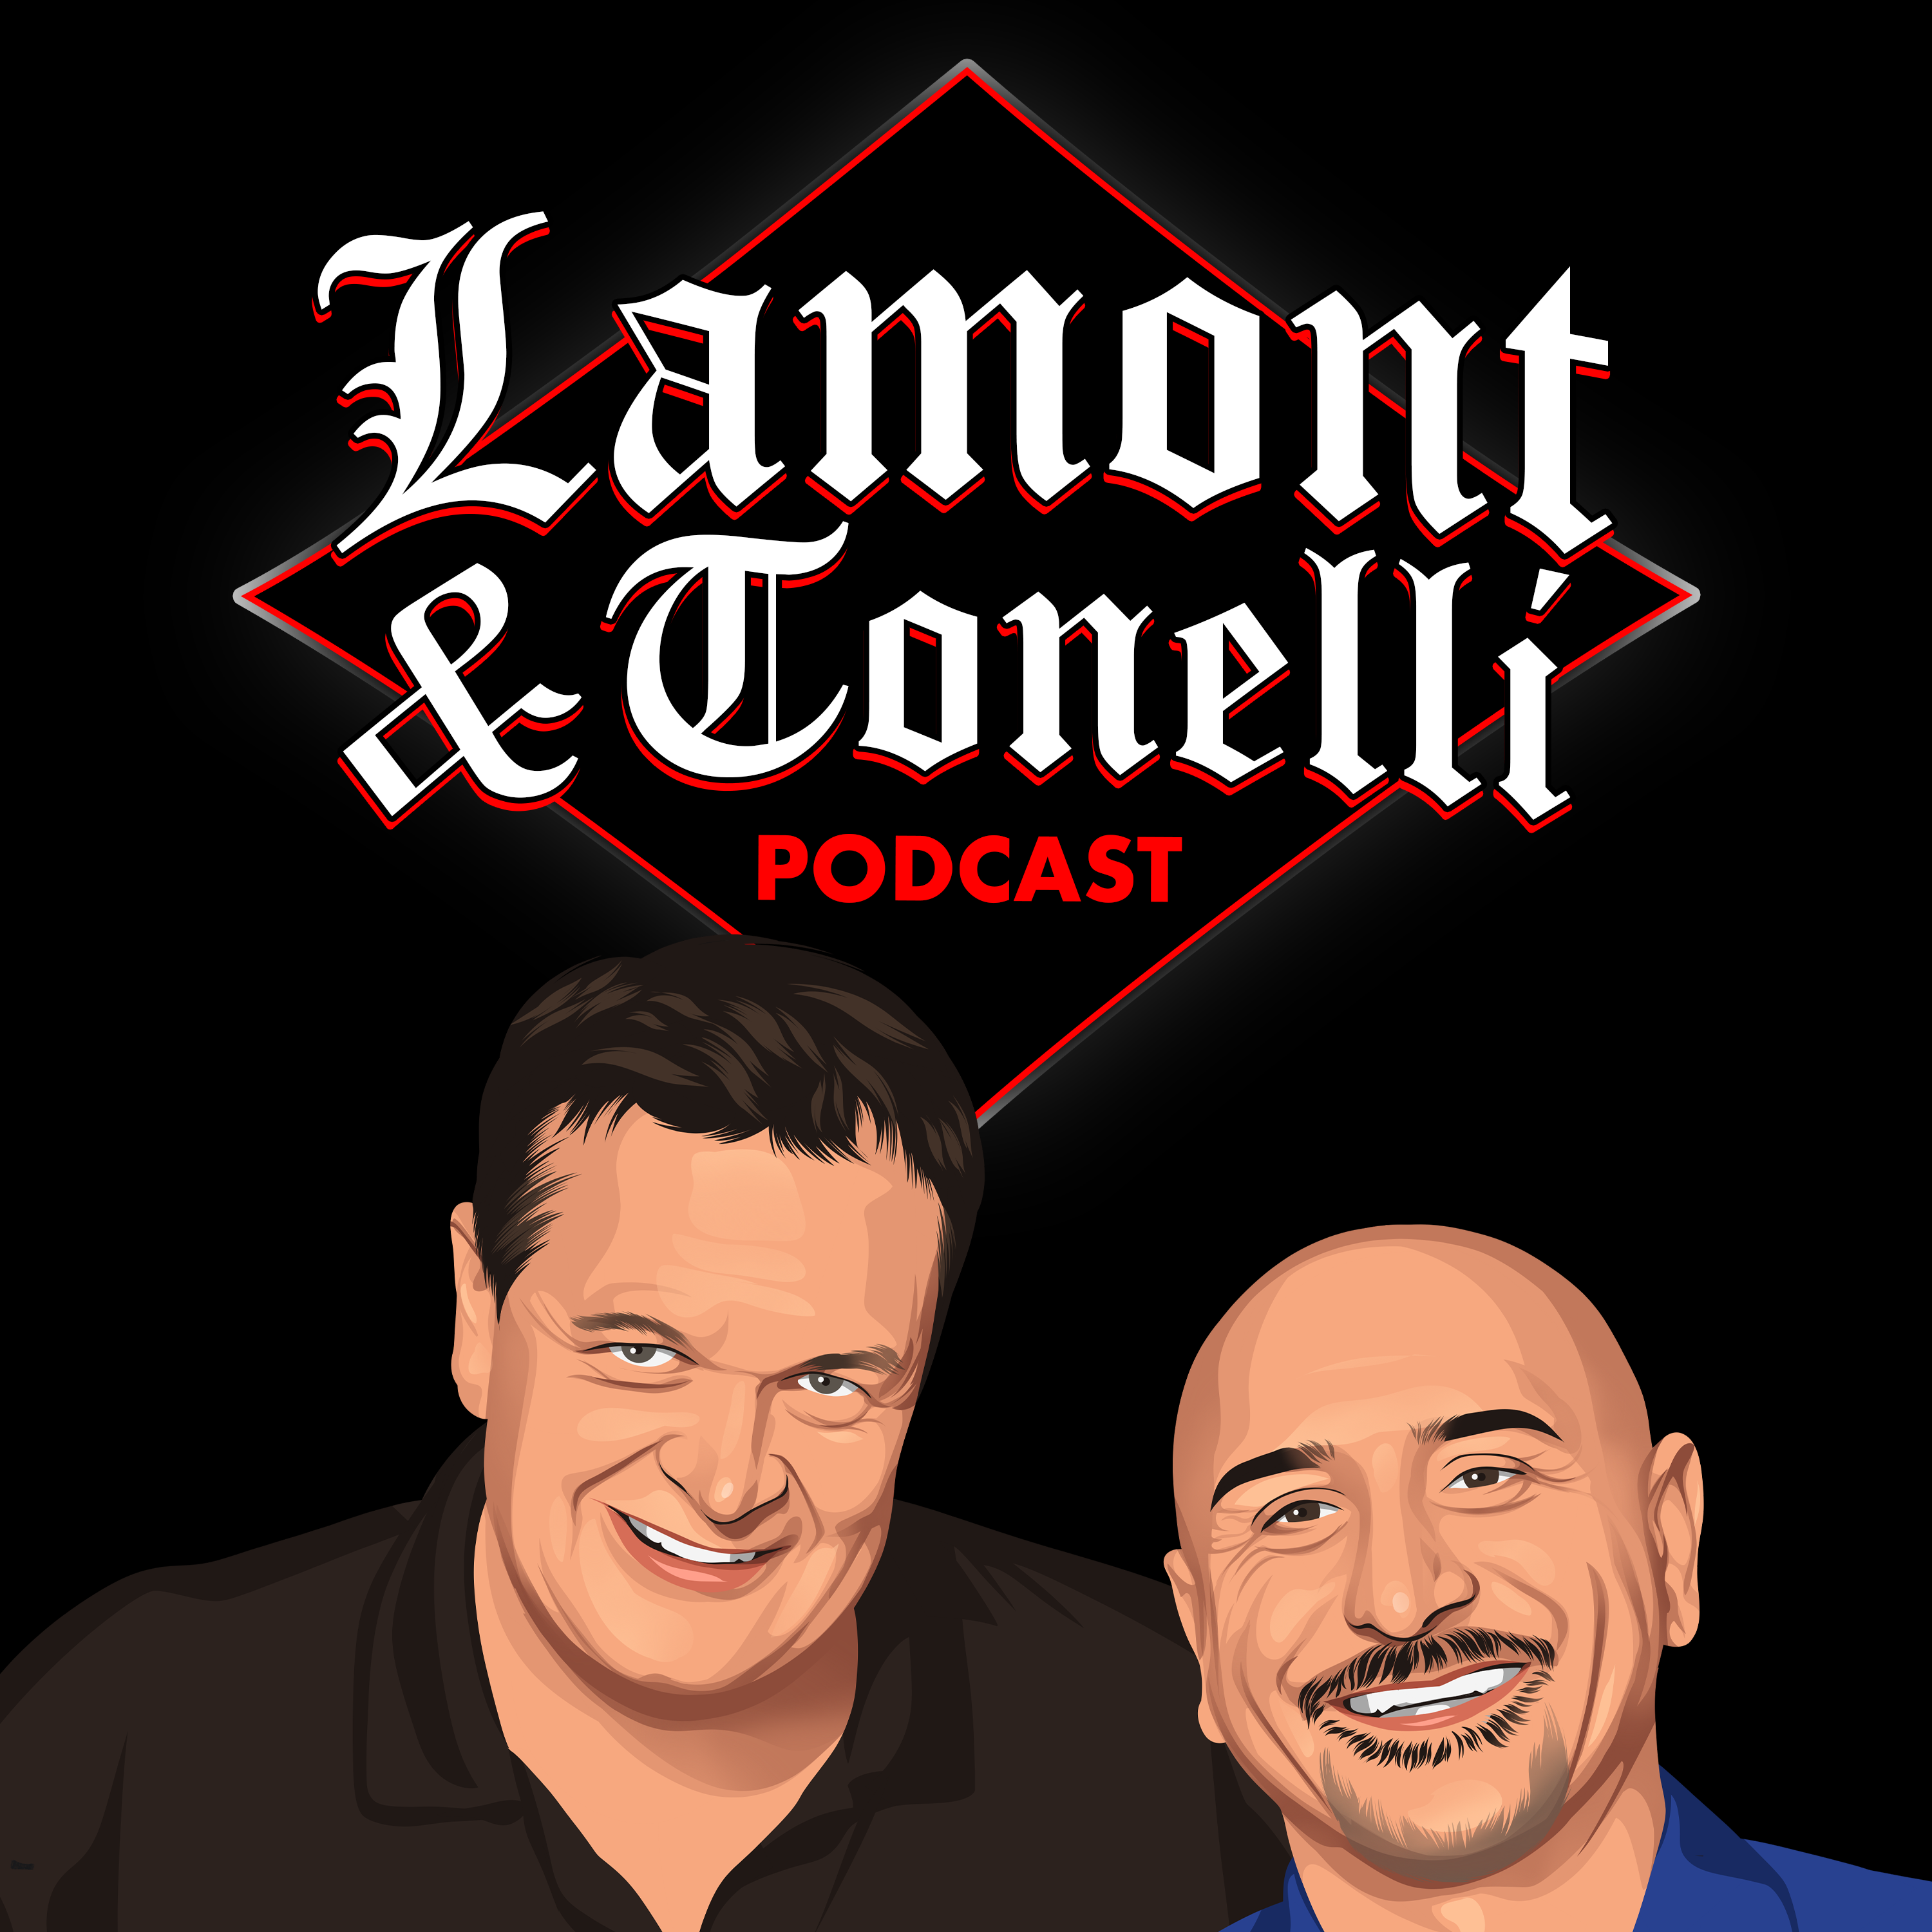 Lamont & Tonelli Talk About Good Friday With Pope Francis